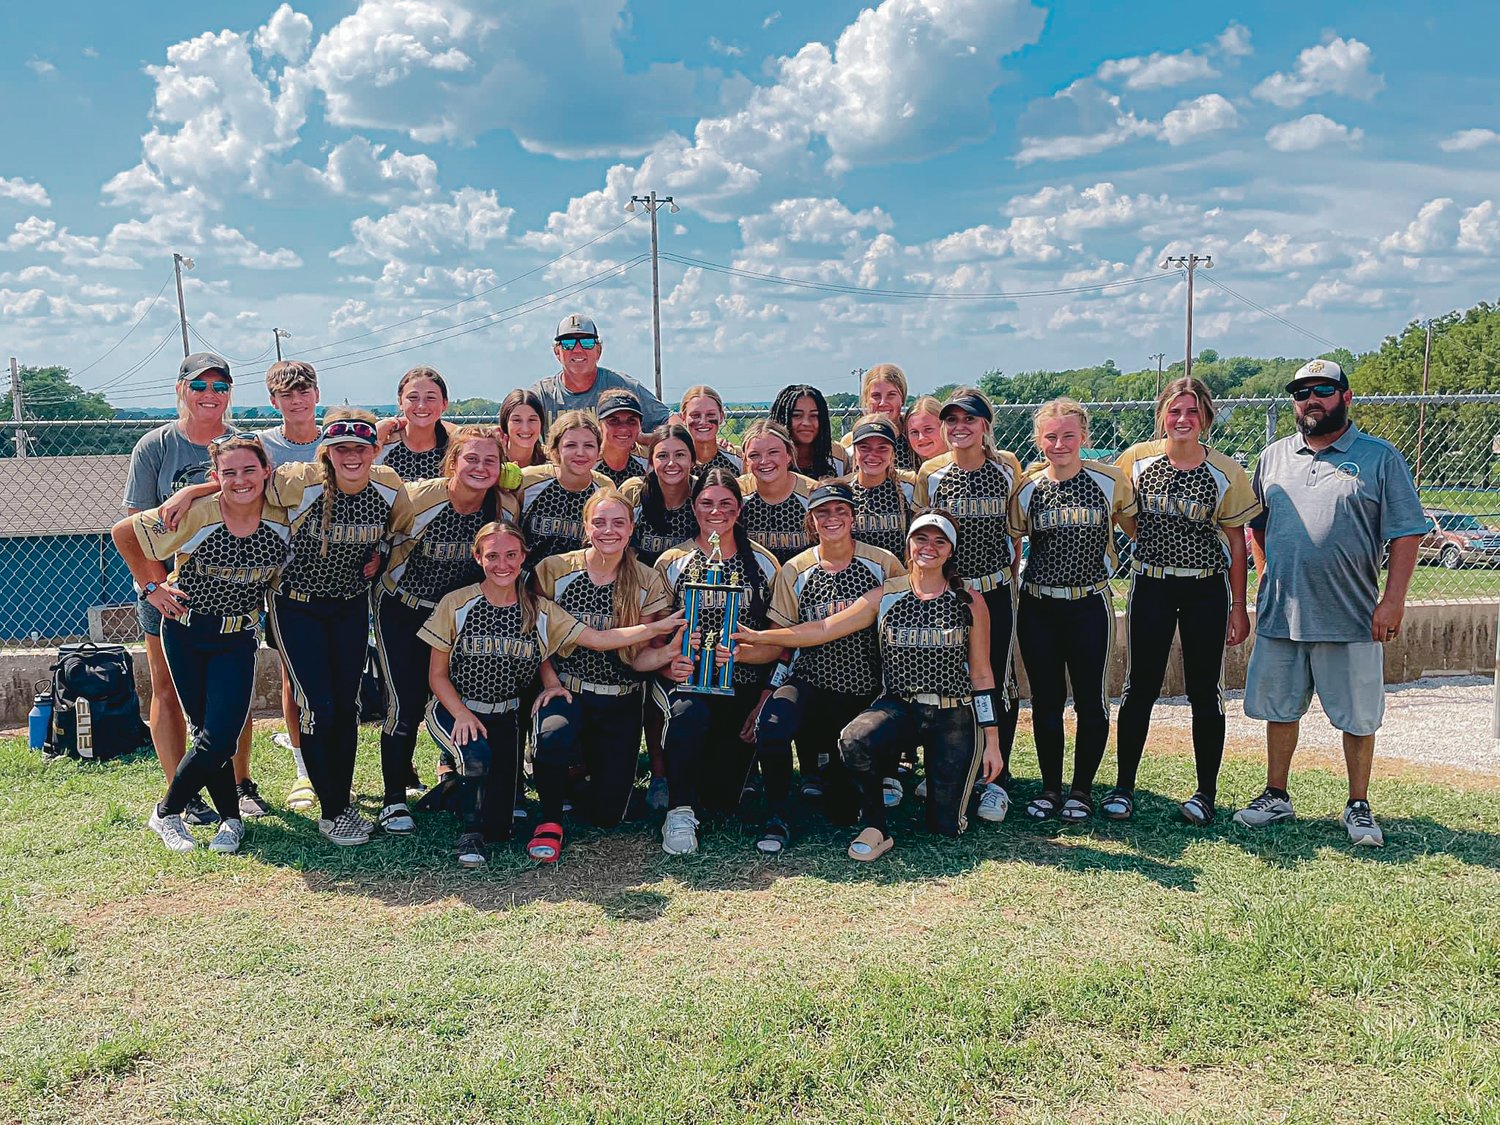 The Lebanon softball team won the consolation bracket at the Morrisville tournament over the weekend. The Lady 'Jackets went 3-1 in the tournament.